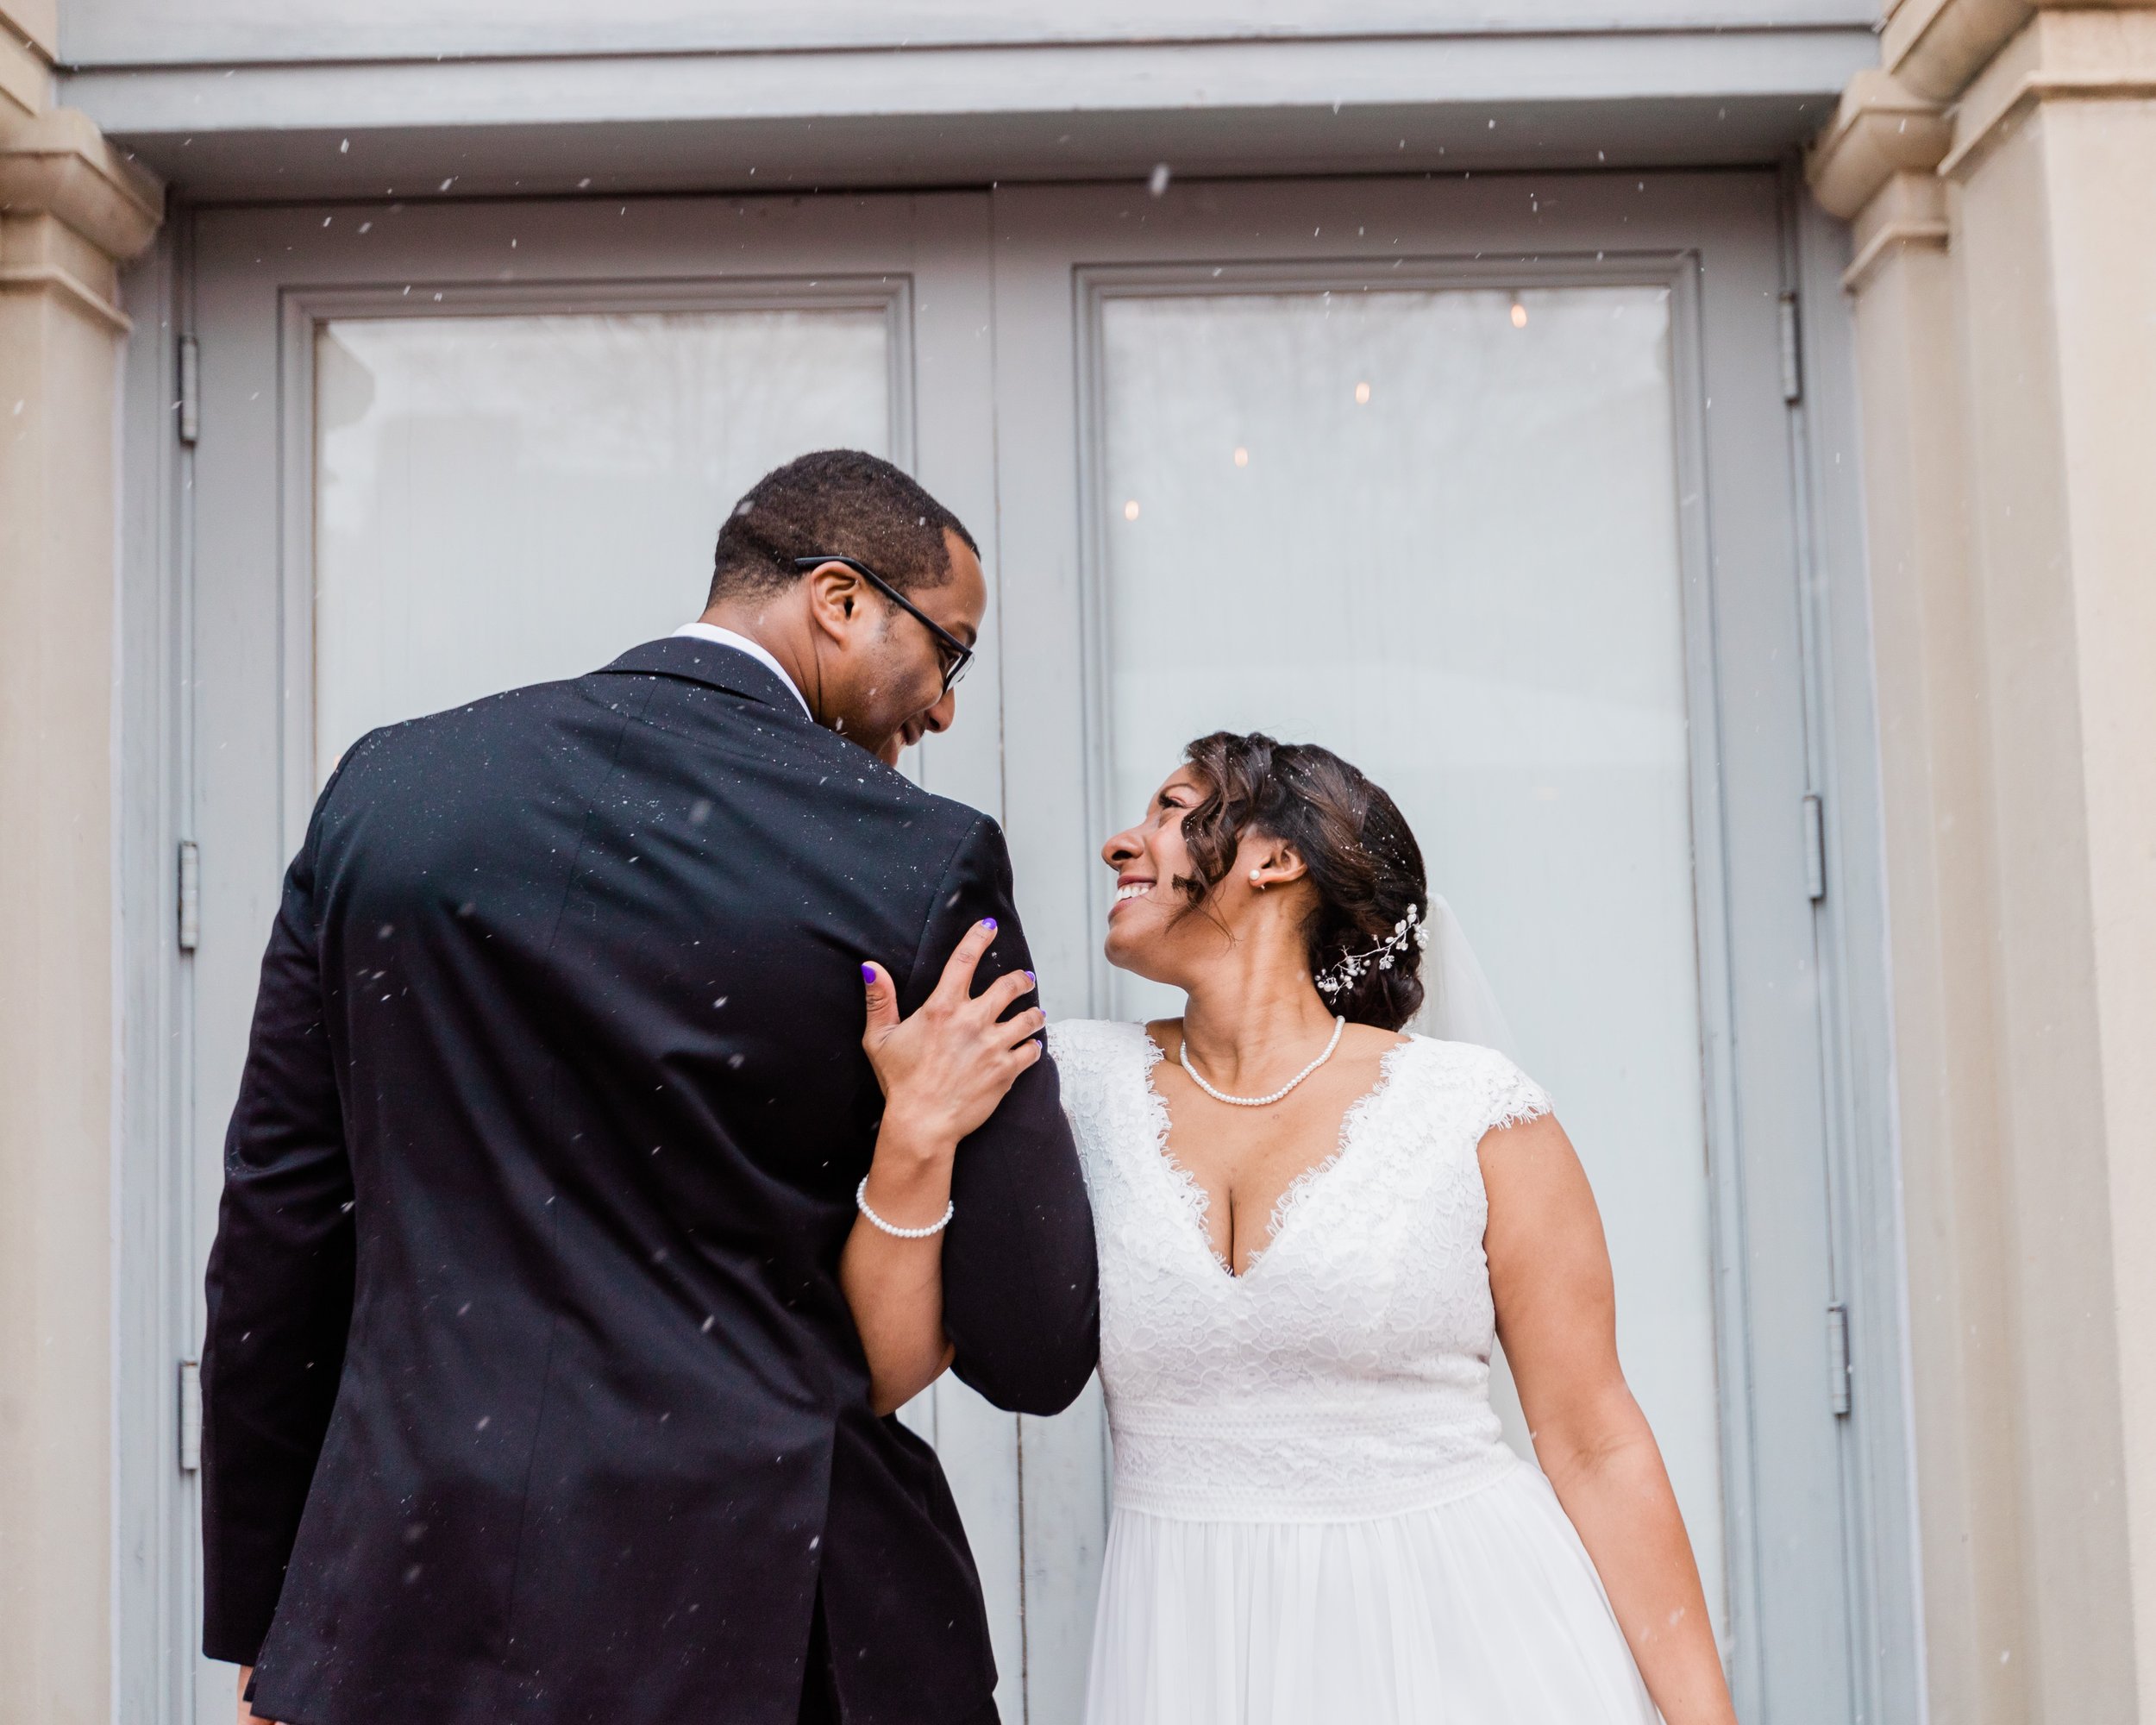 Snowy Winter Wedding at 1840's Plaza in Baltimore City Megapixels Media Photography-32.jpg